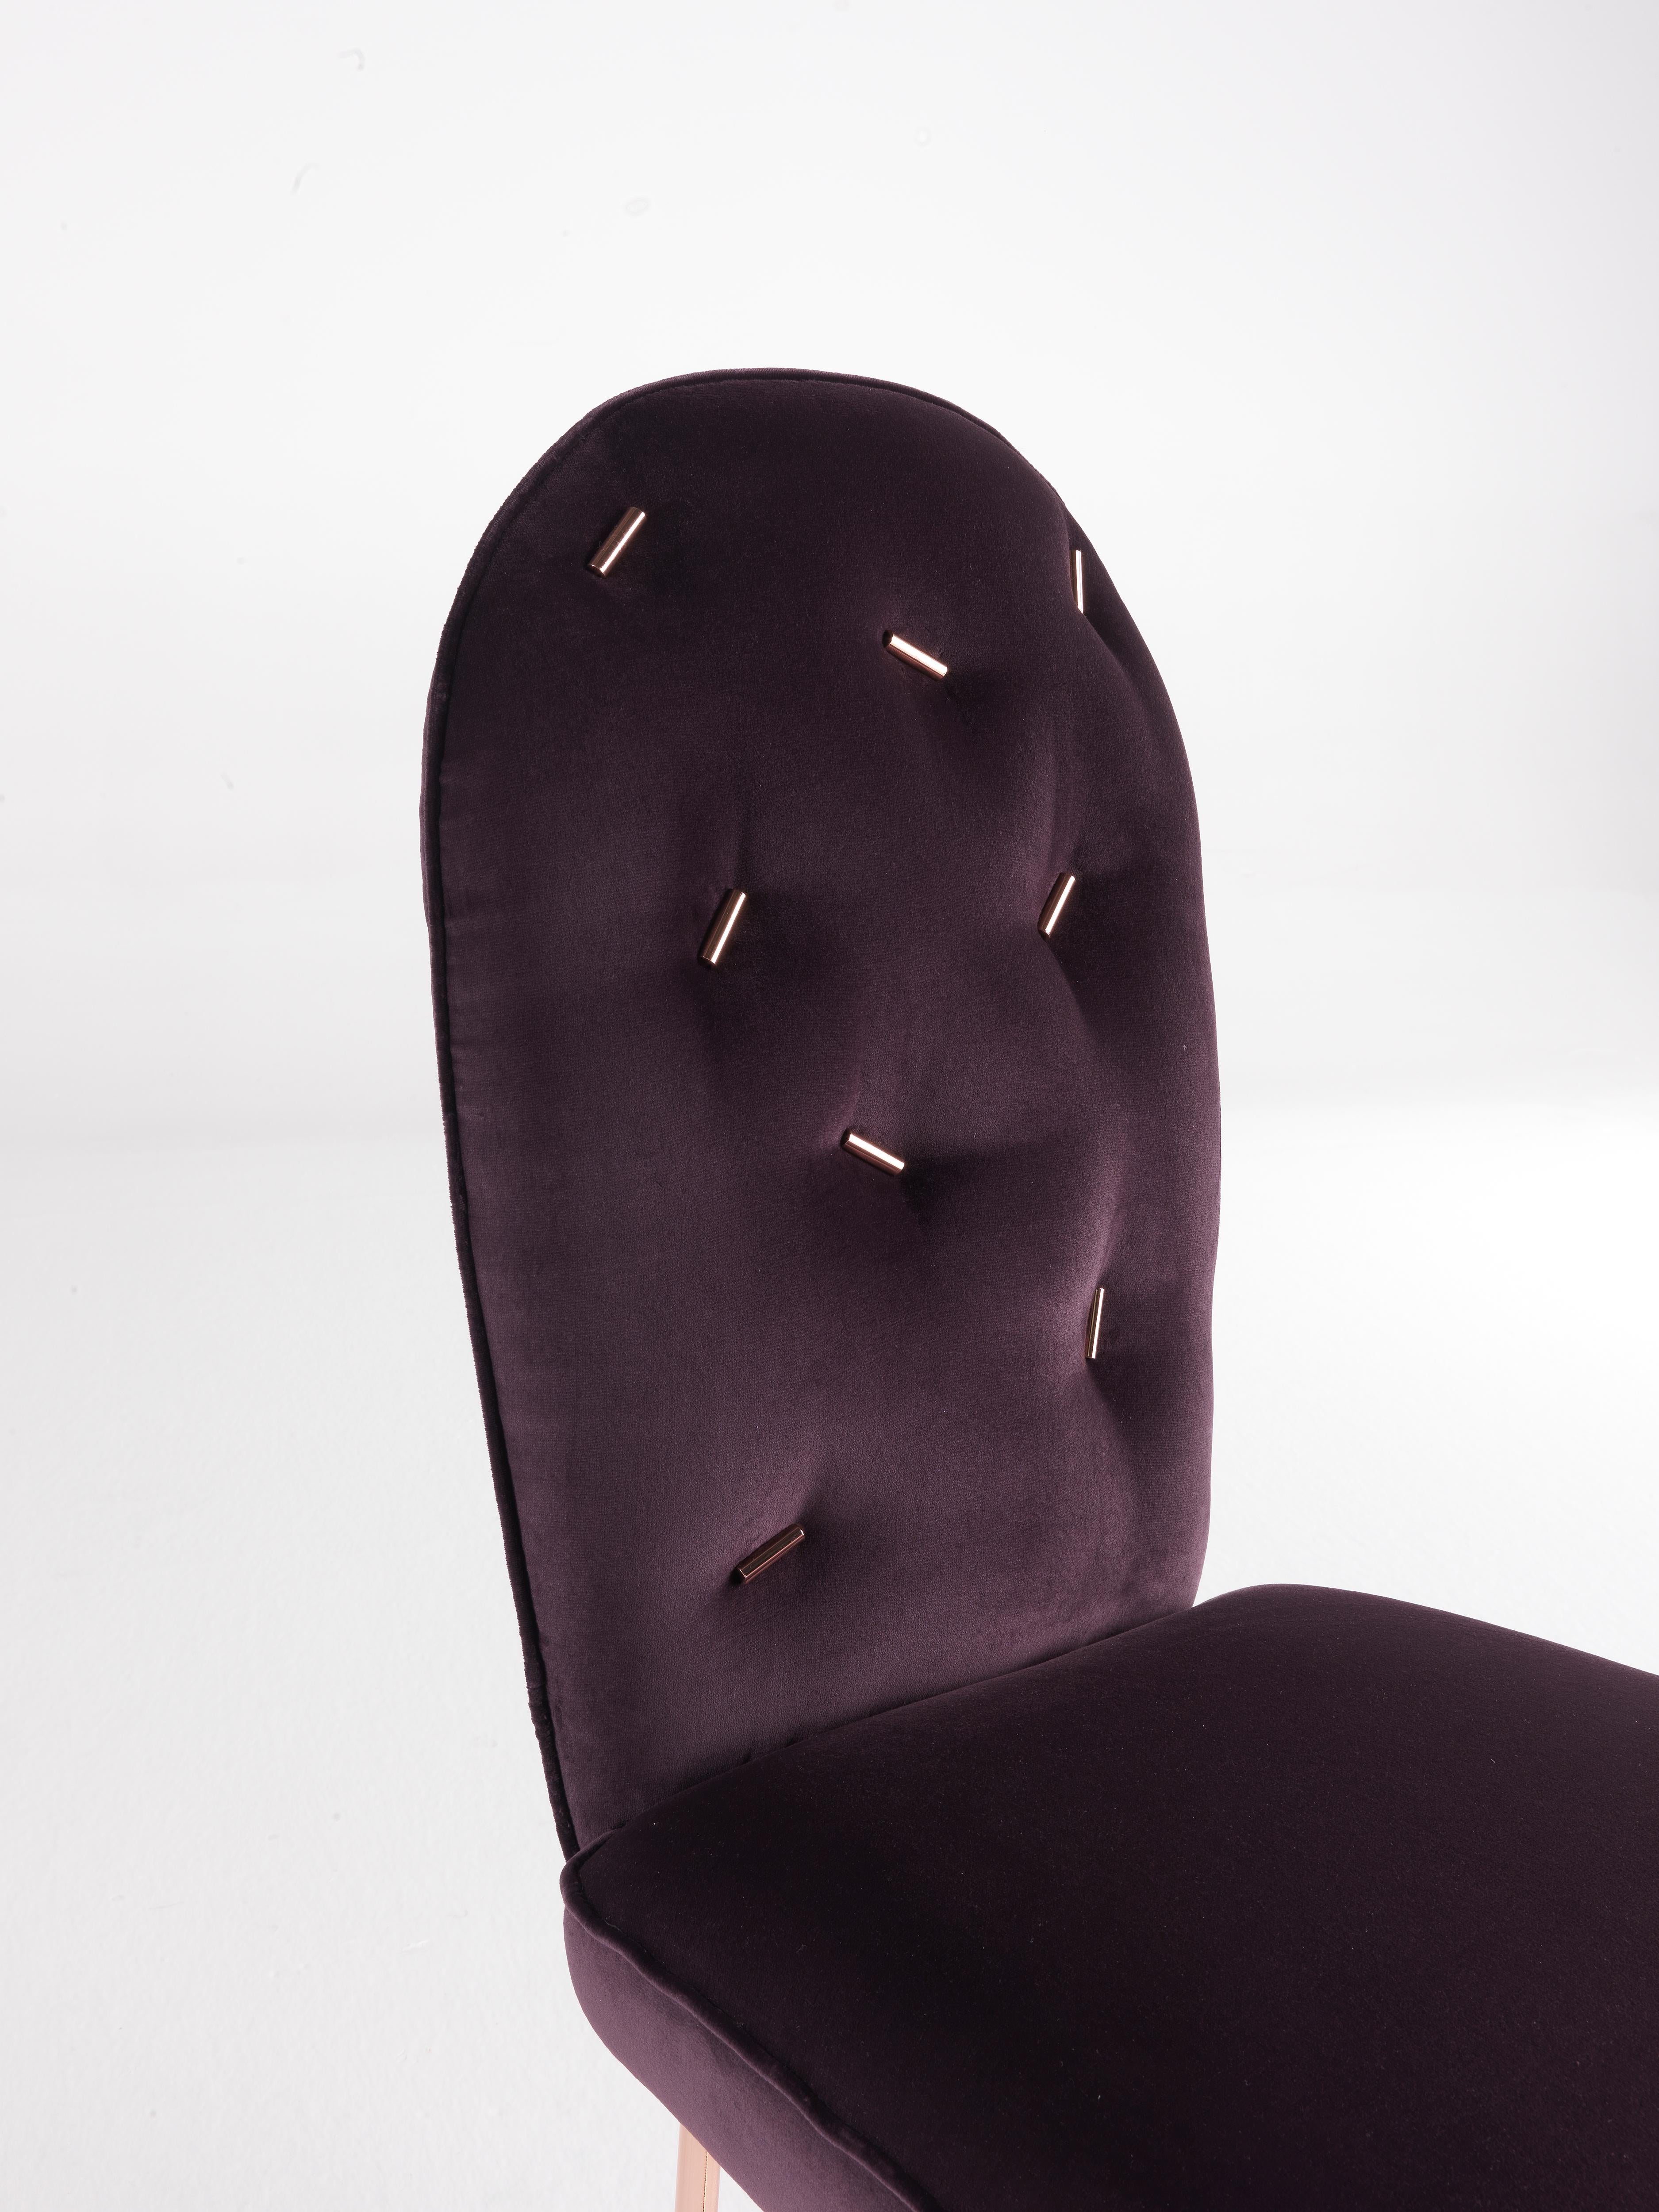 Modern 21st Century Ttemic Chair in Velvet with Metal Applications by Matteo Cibic For Sale